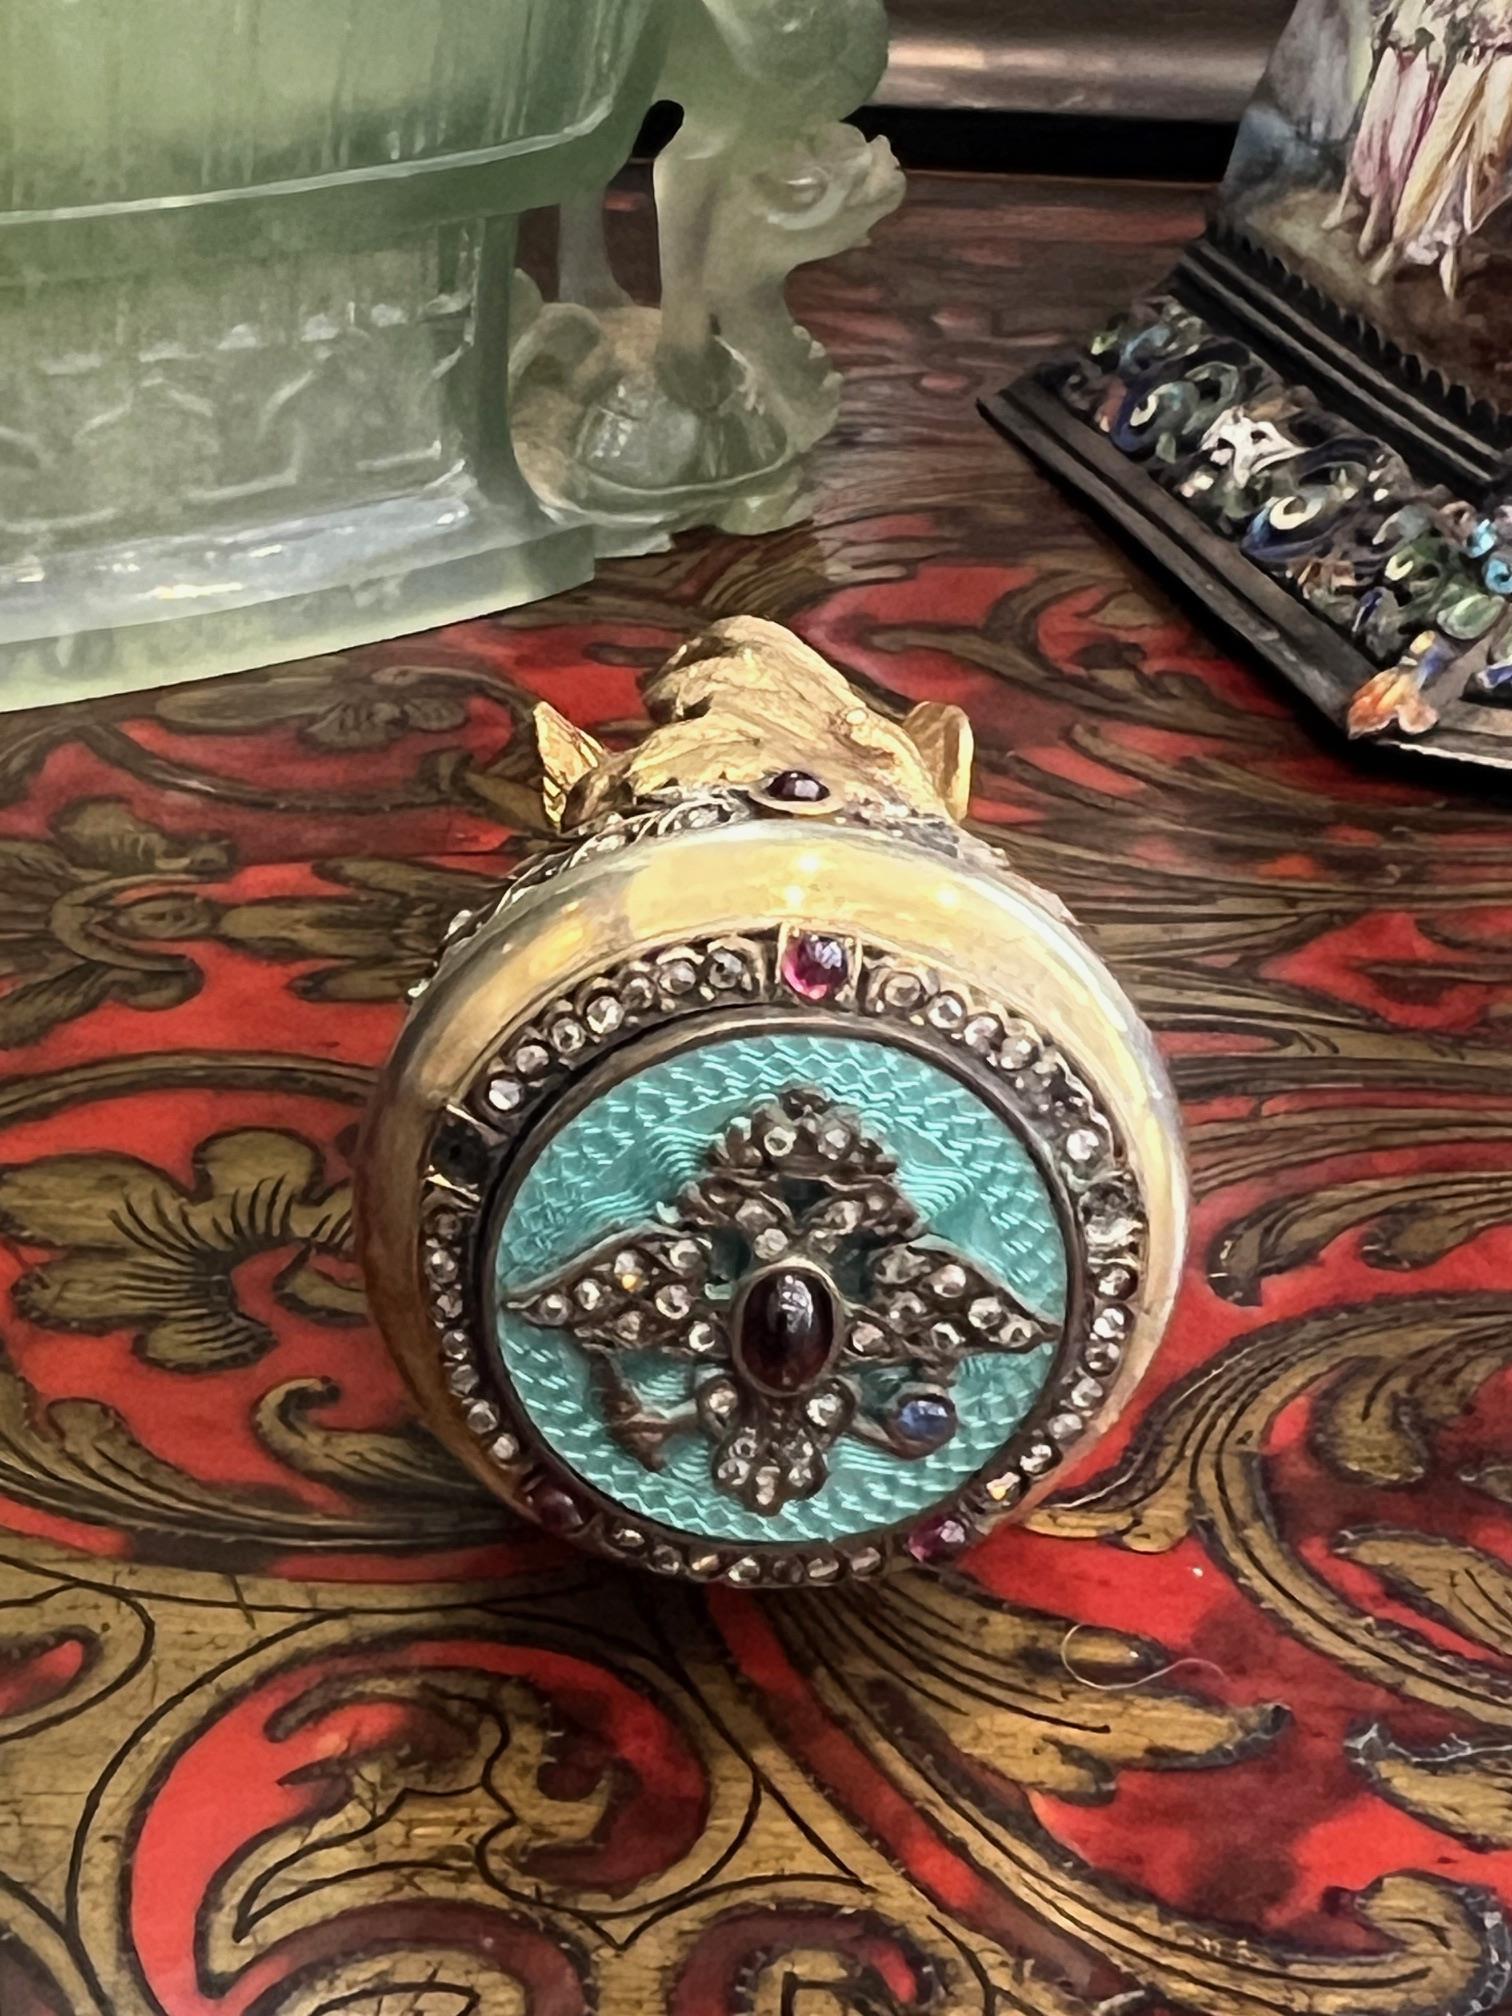 A FABERGE STYLE SILVER GILT, DIAMOND ENCRUSTED AND ENAMELLED PILL BOX - Image 6 of 7